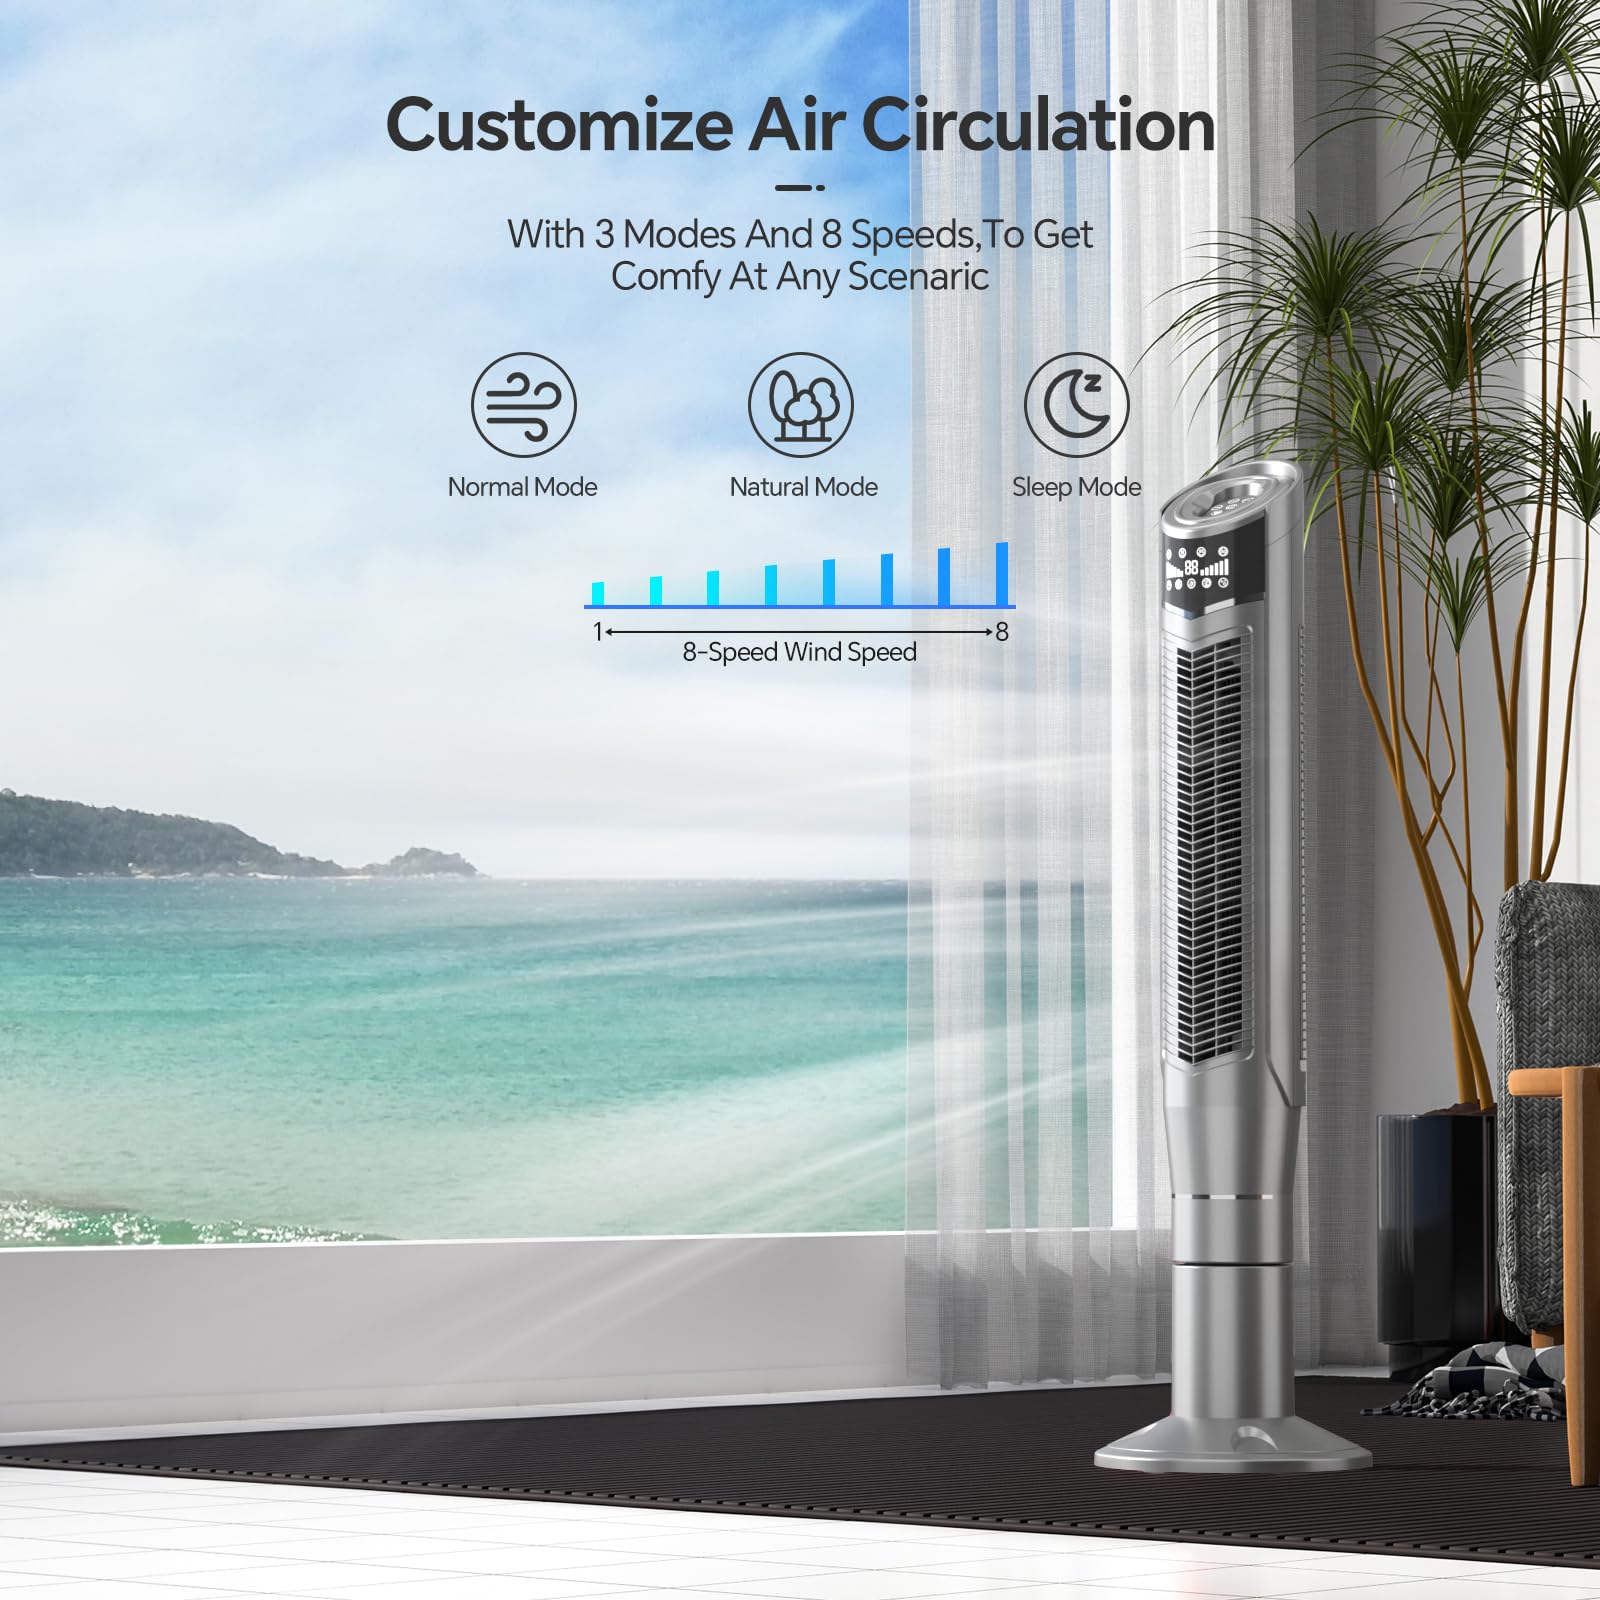 Kismile 47 inch Portable Oscillating Quiet Tower Fan with Remote Control,3 Modes and 8 Wind Speed Setting, Built in 24 H Timer LED Display Powerful Standing Fans (47 inch, Silver)